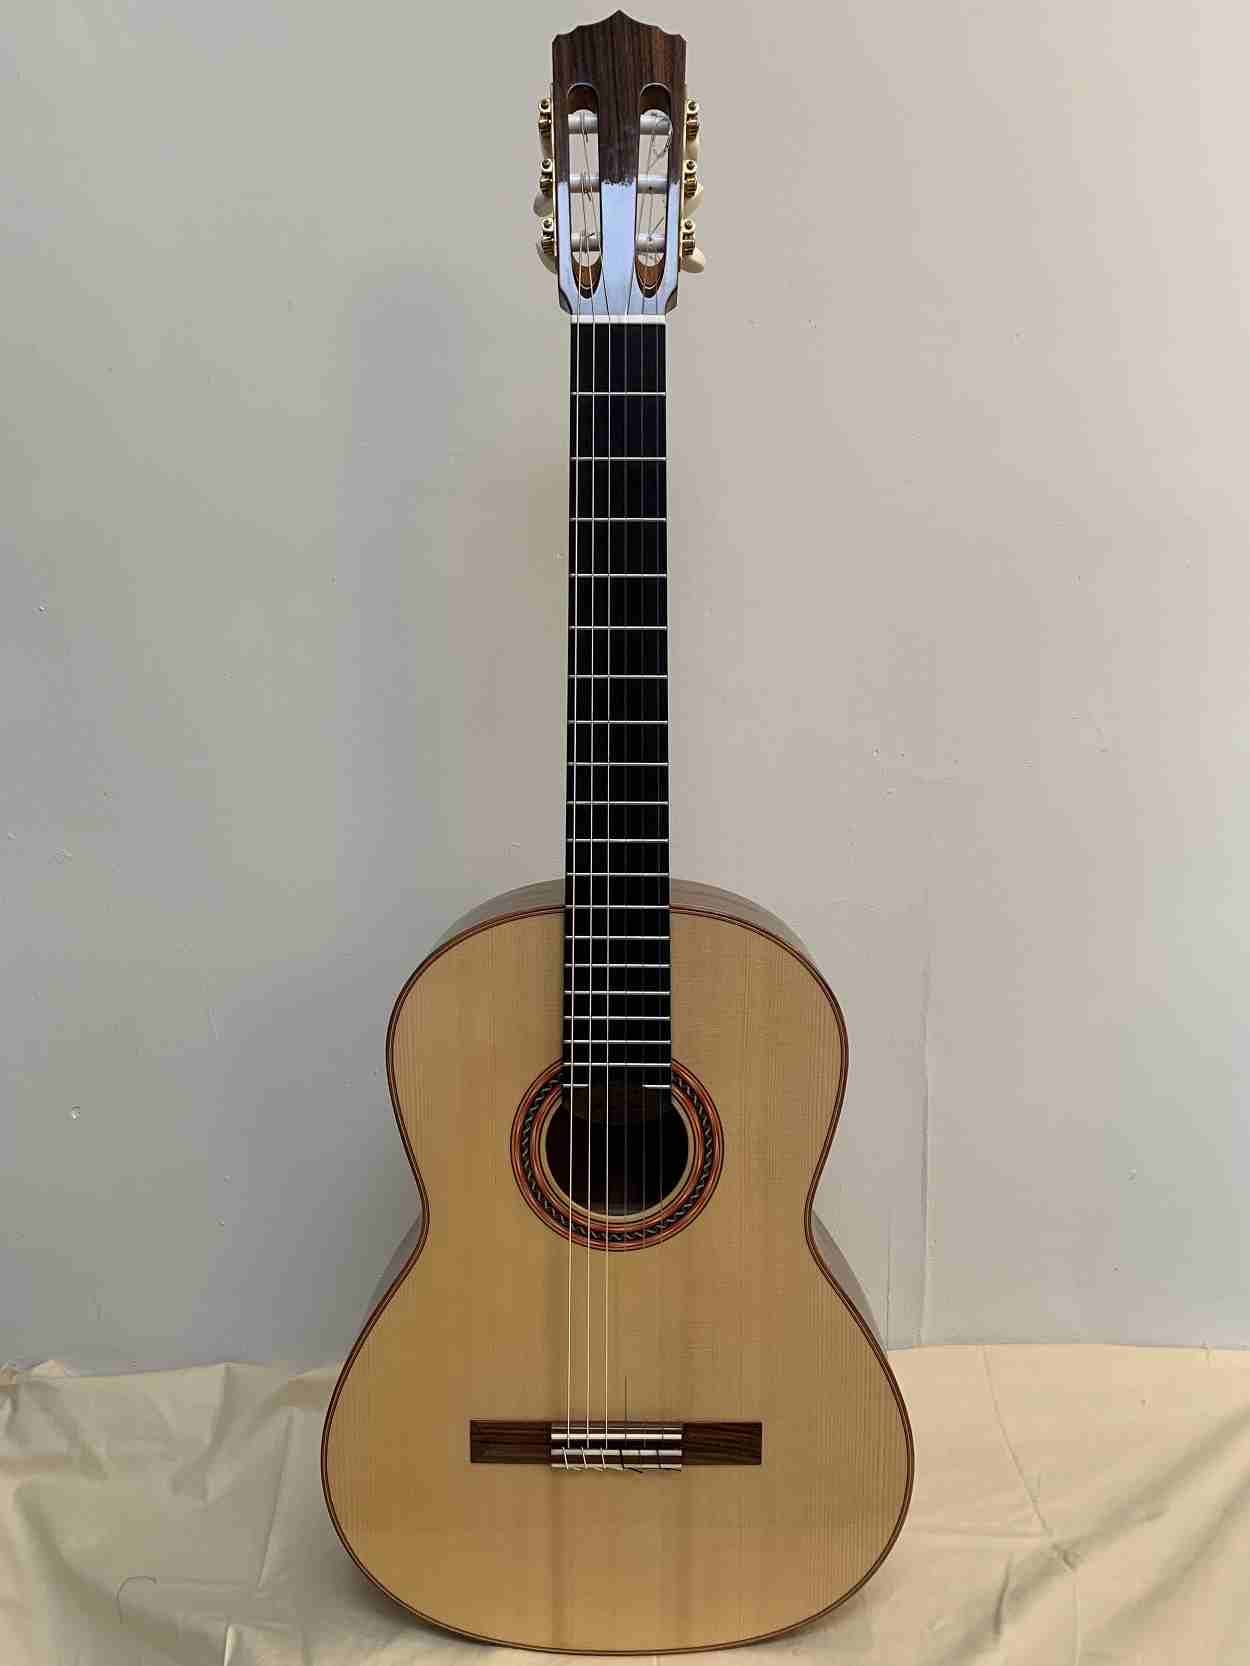 A concert classical guitar Hauser 1937 style build with Spruce and Ovankol back and sides